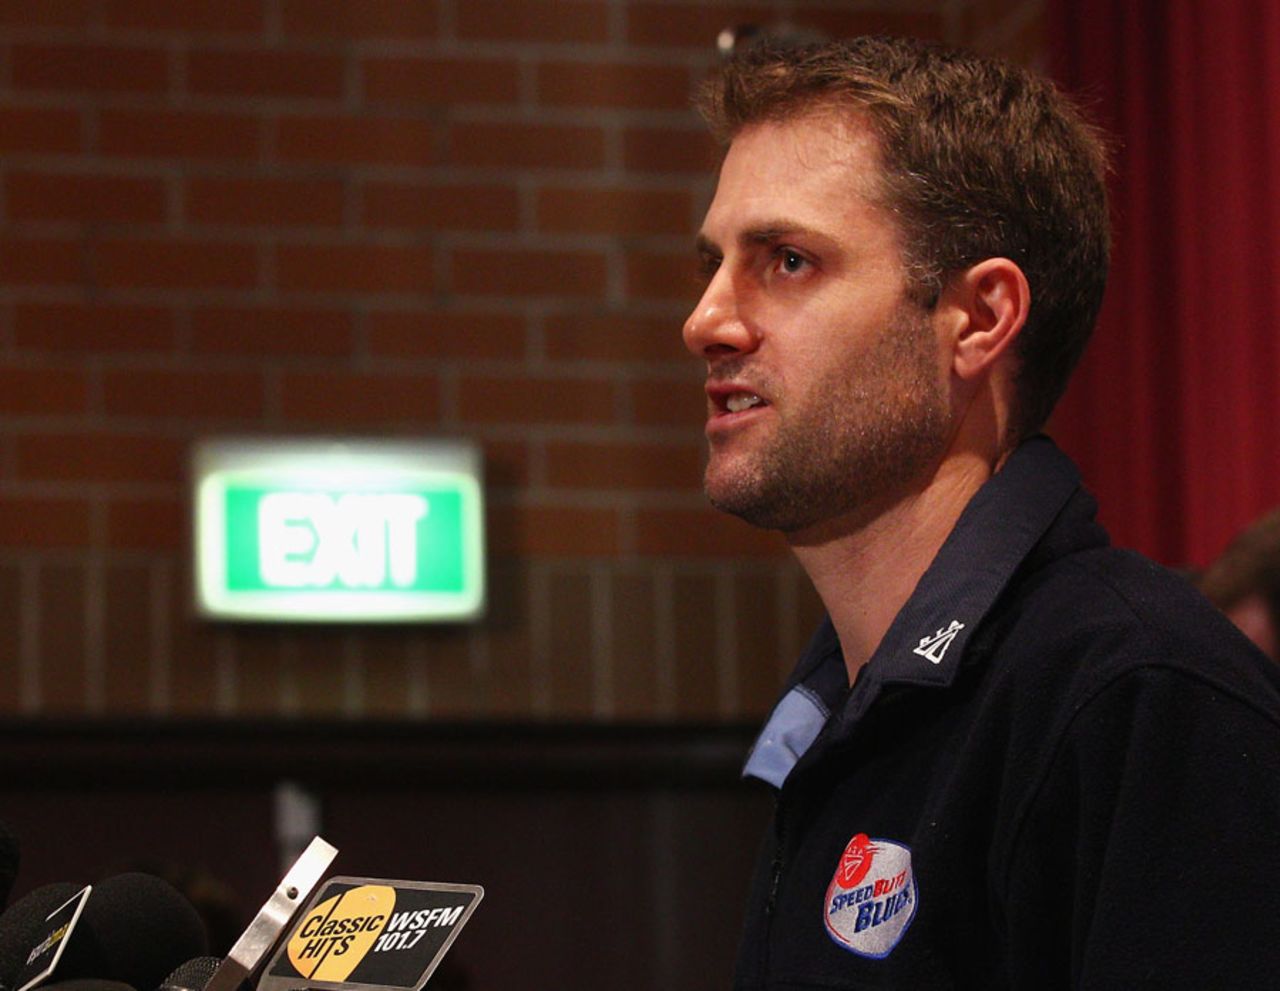 Simon Katich addresses the media after losing out on a central contract, Sydney, June 10, 2011